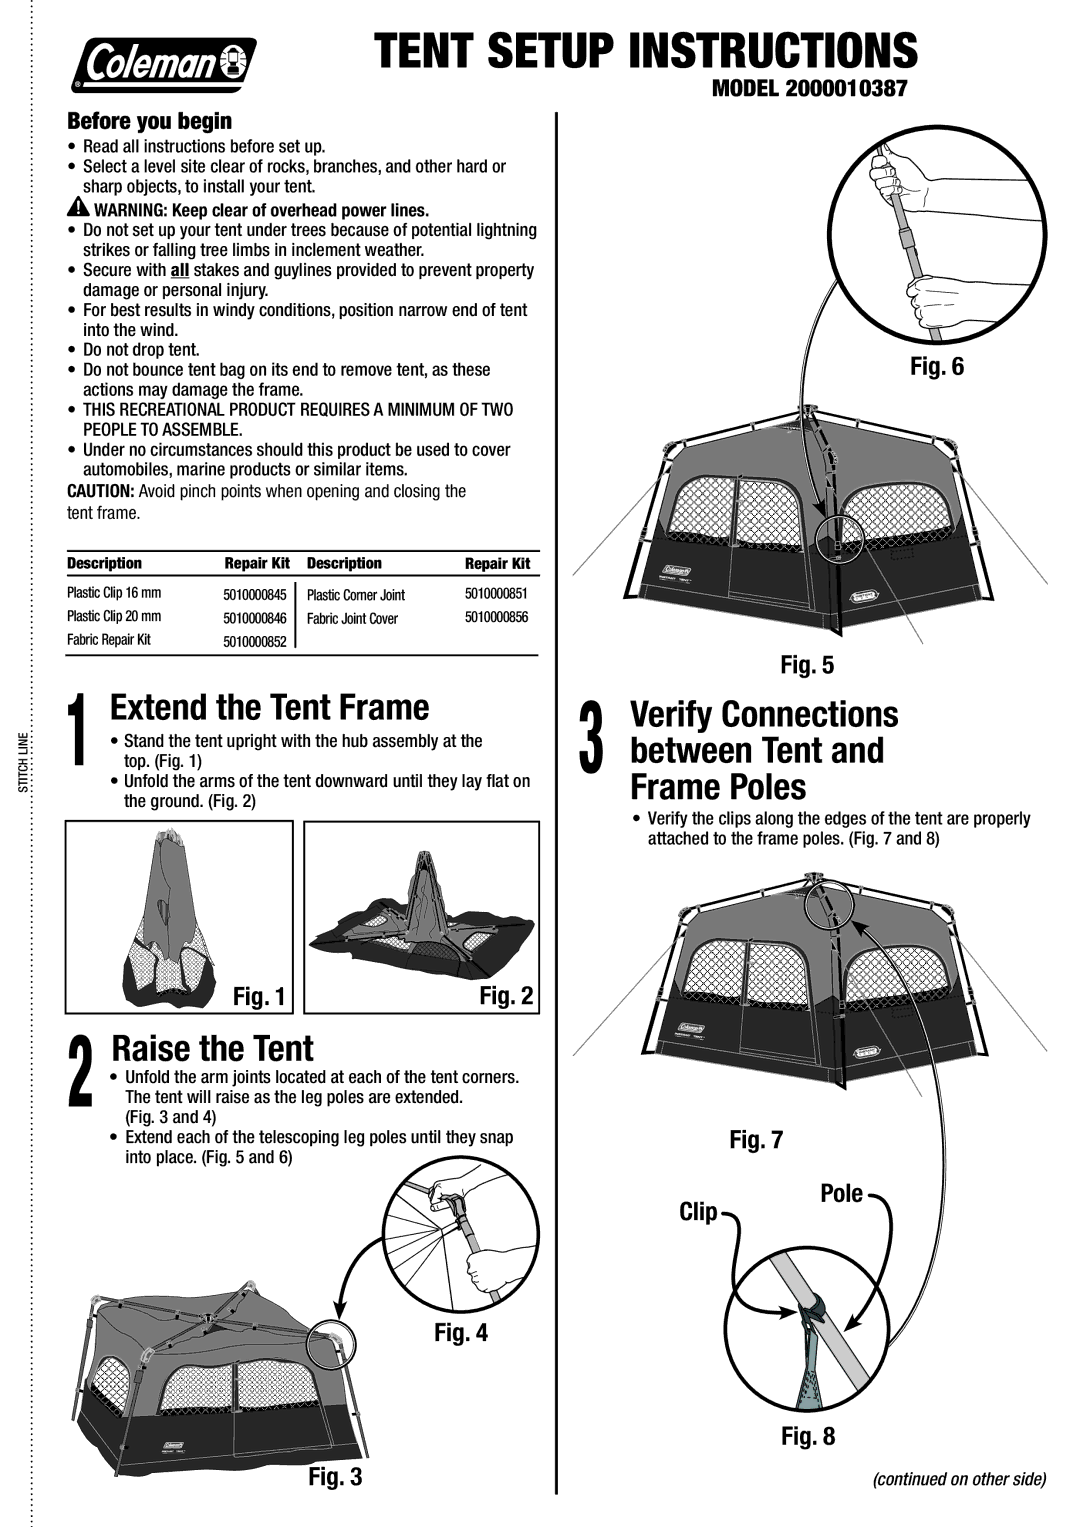 Coleman manual Verify Connections, Between Tent, Frame Poles, Raise the Tent, Model 2000010387 Before you begin 